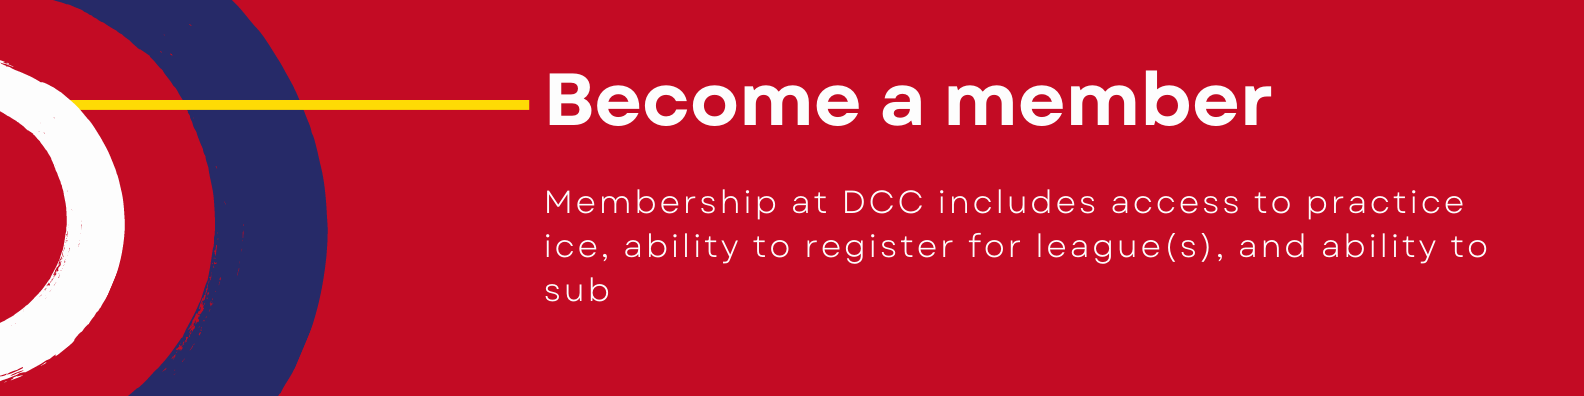 DCC Become a member